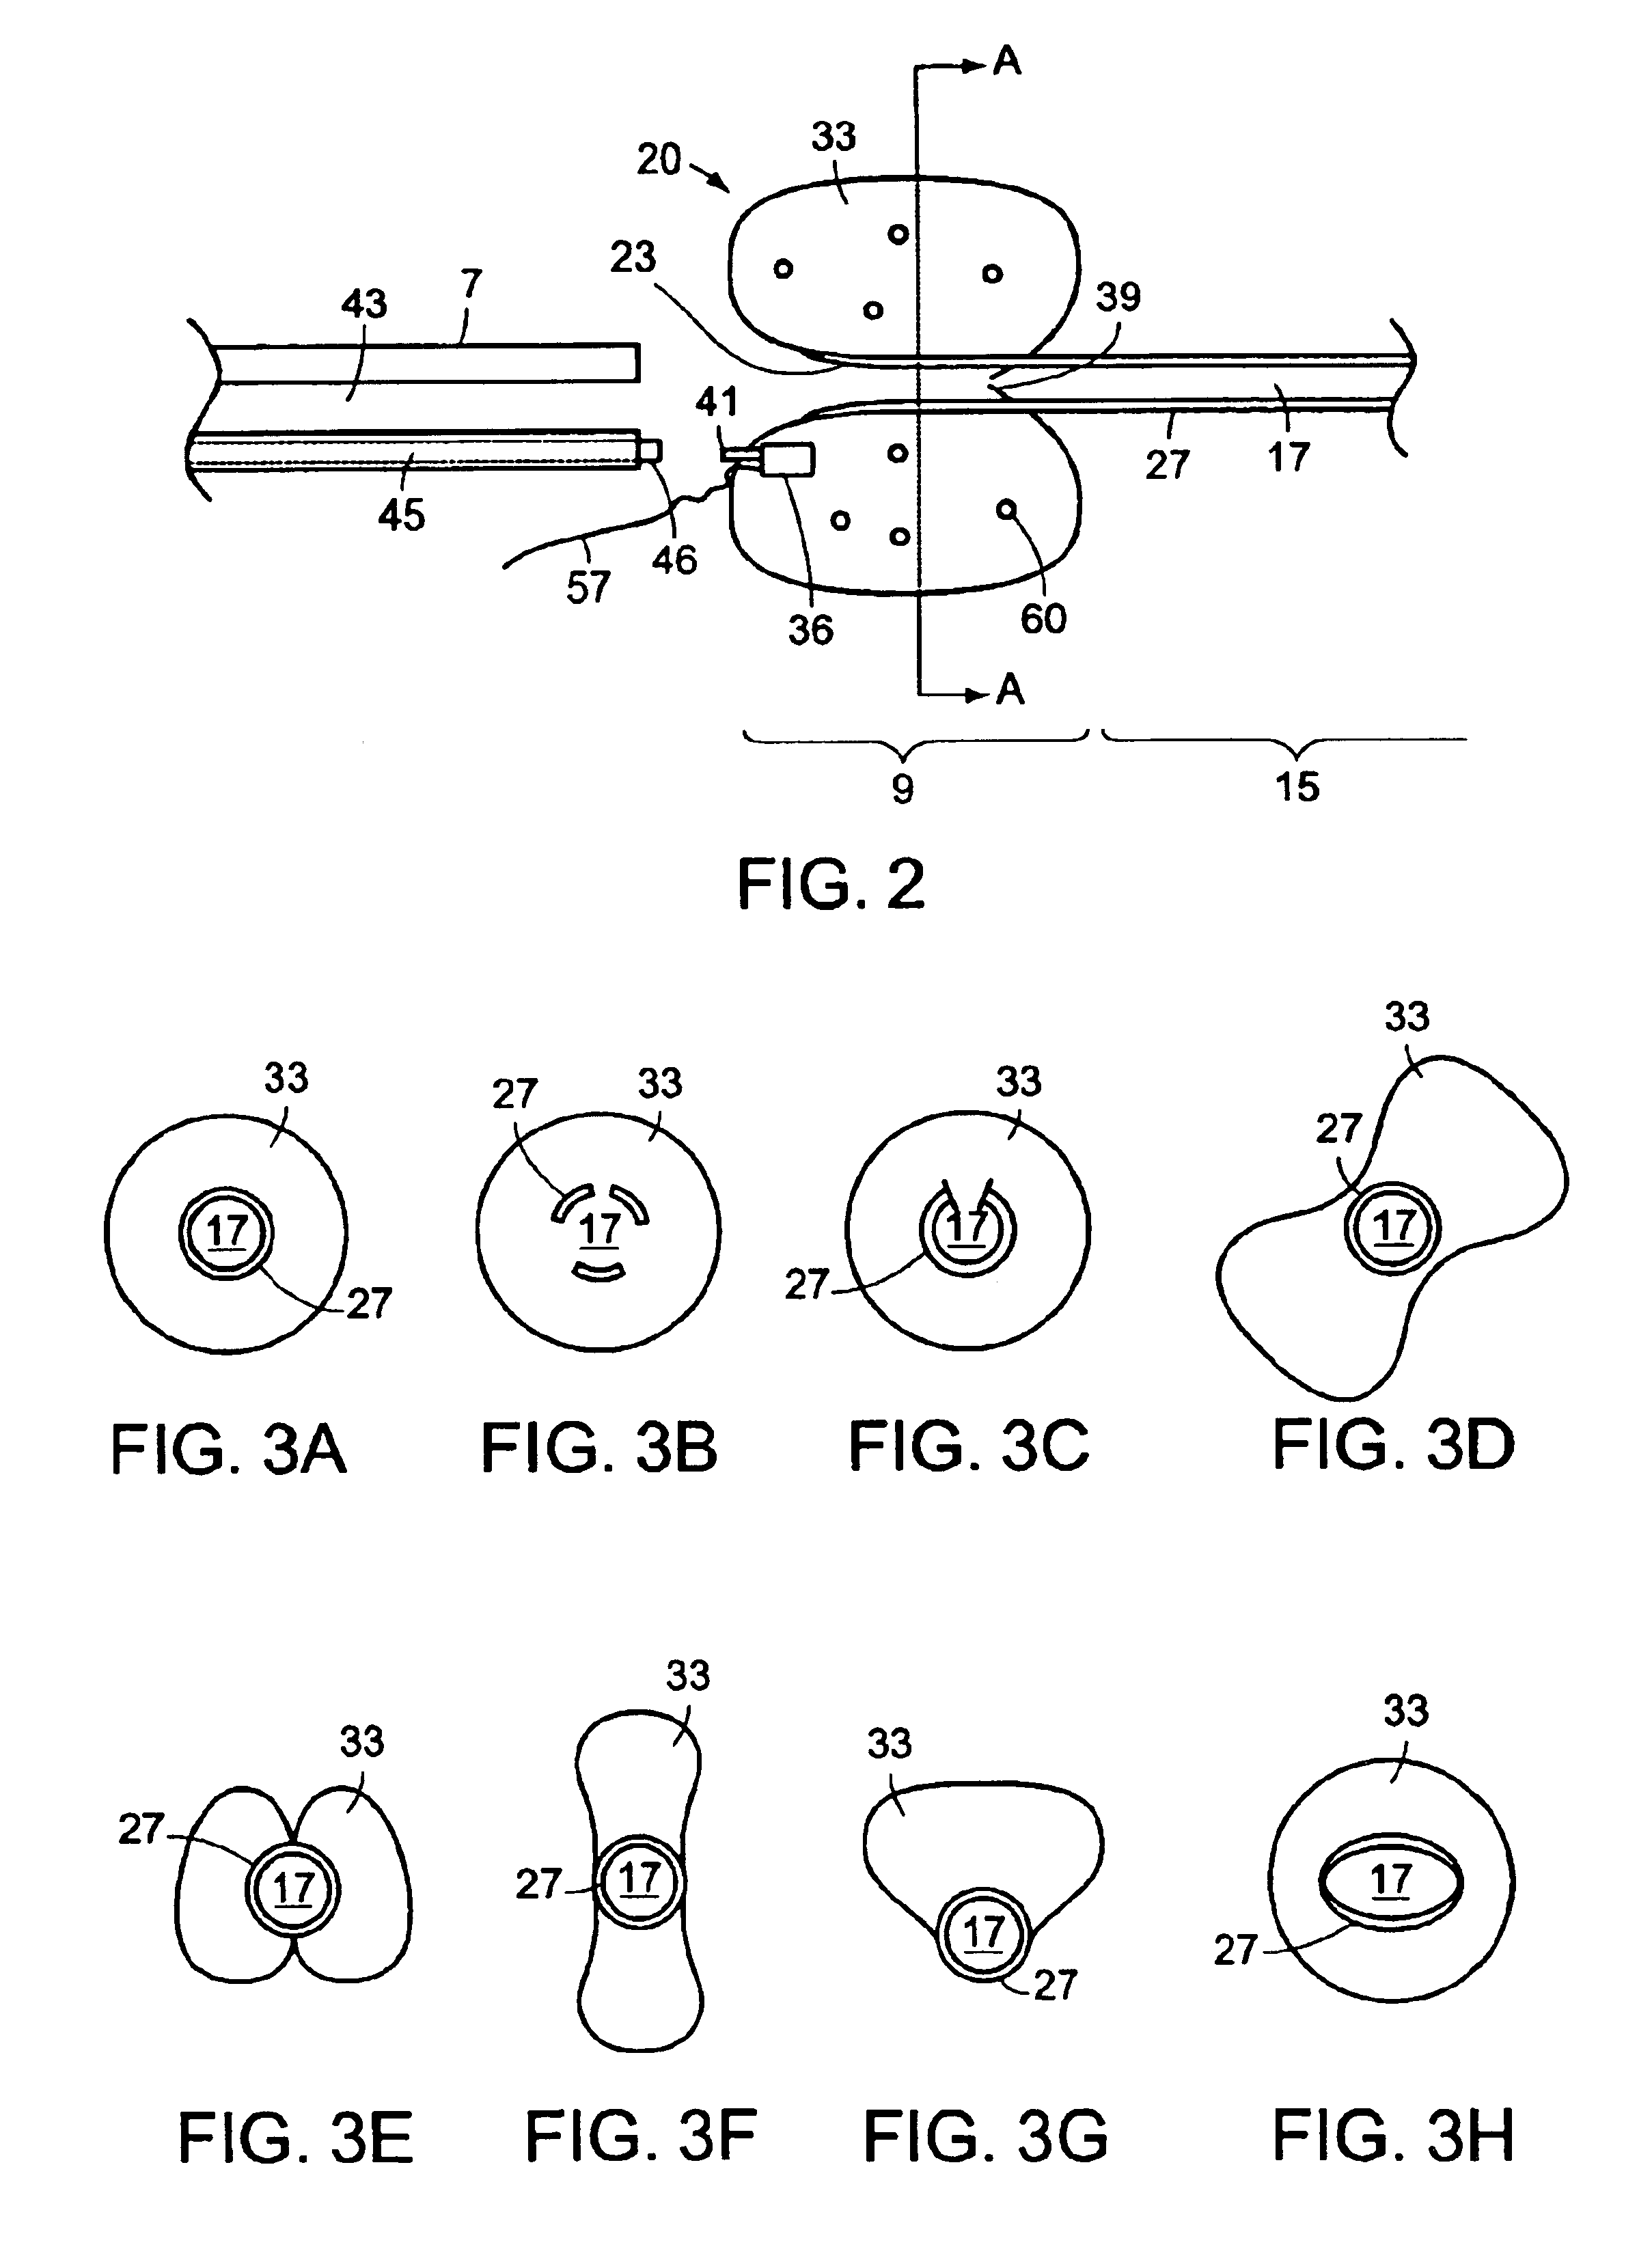 Ureteral stent with end-effector and related methods